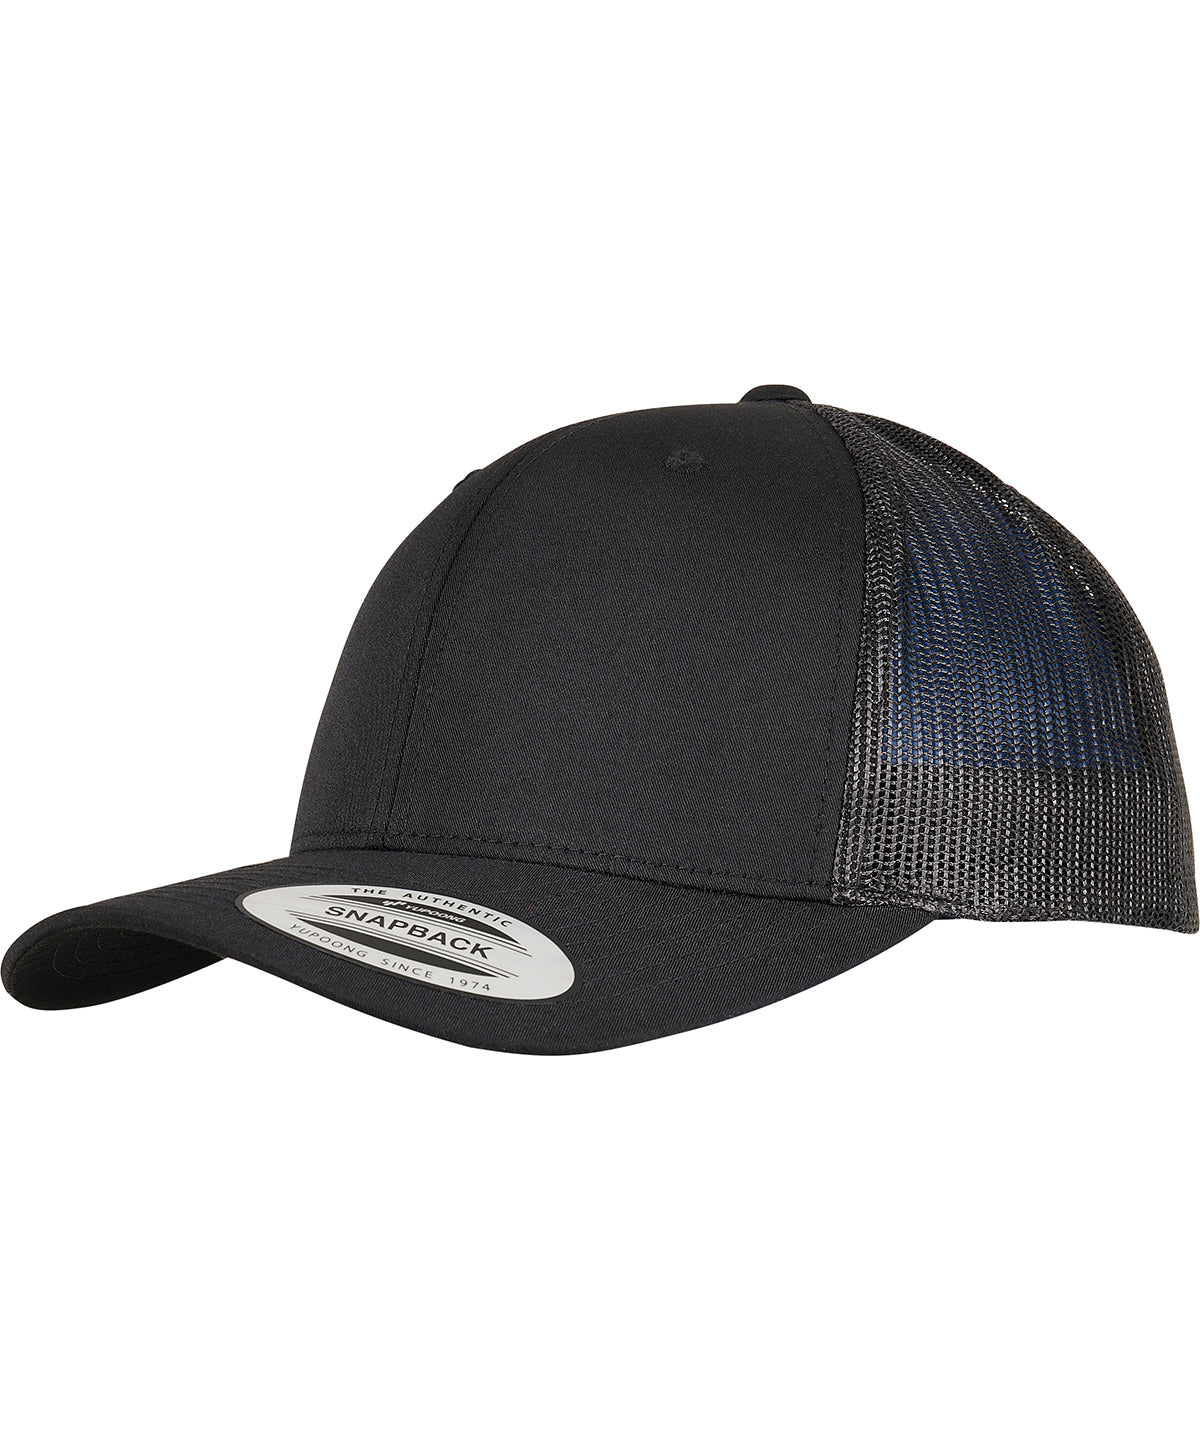 Flexfit by Yupoong Trucker recycled polyester fabric cap